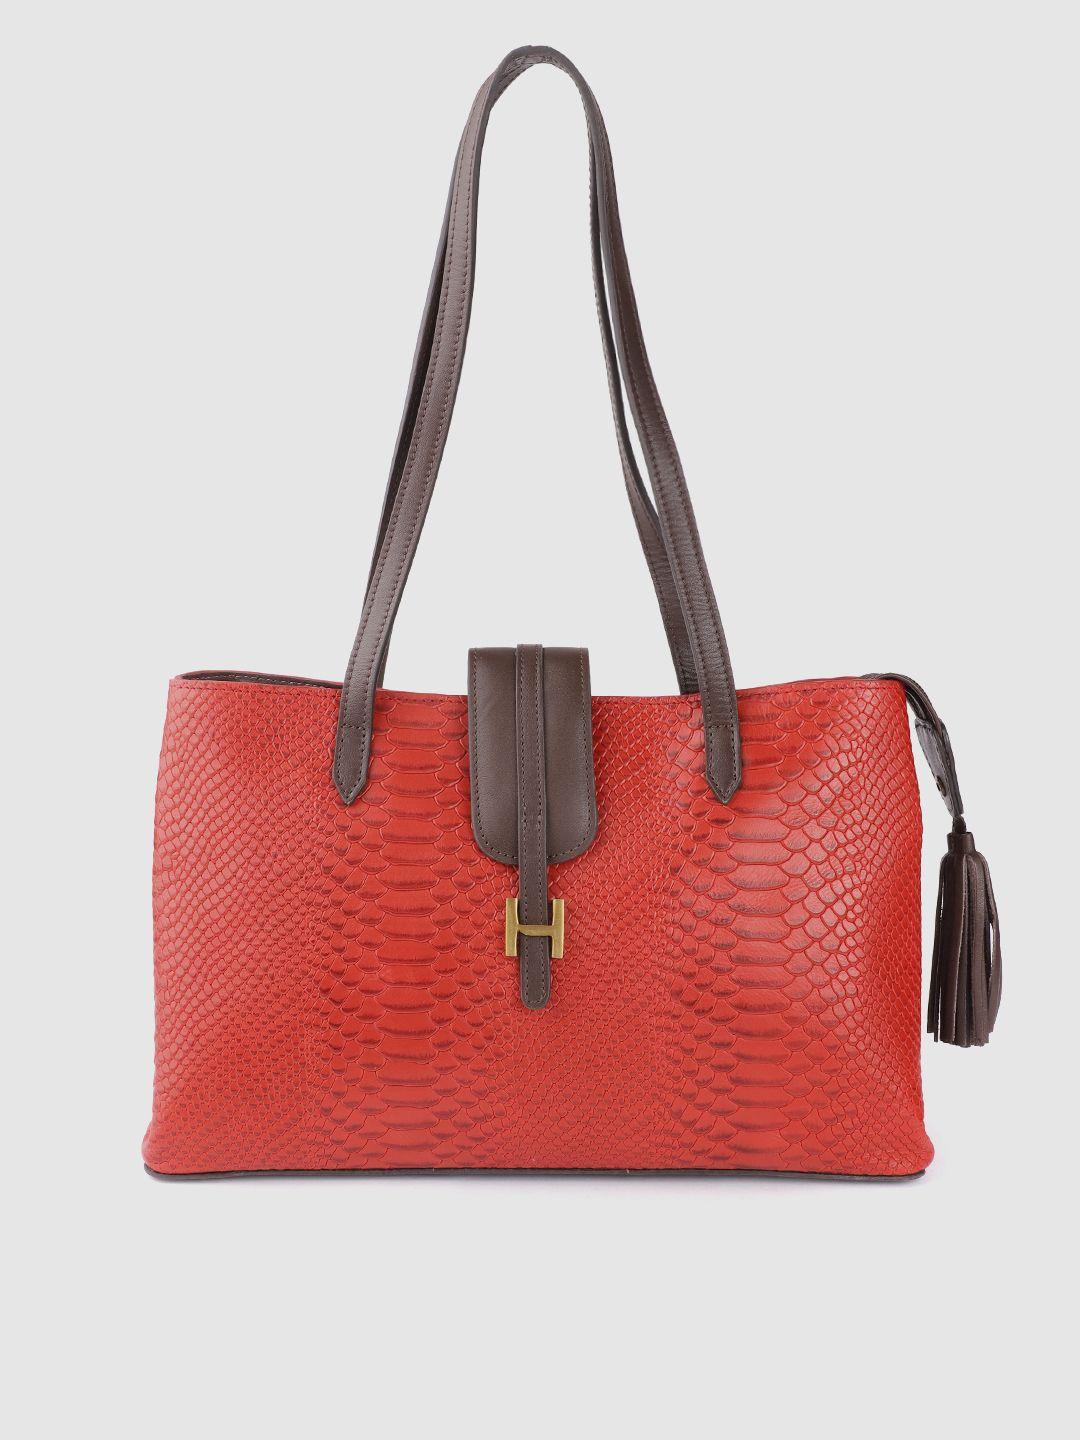 hidesign red & coffee brown handcrafted snakeskin textured leather structured shoulder bag